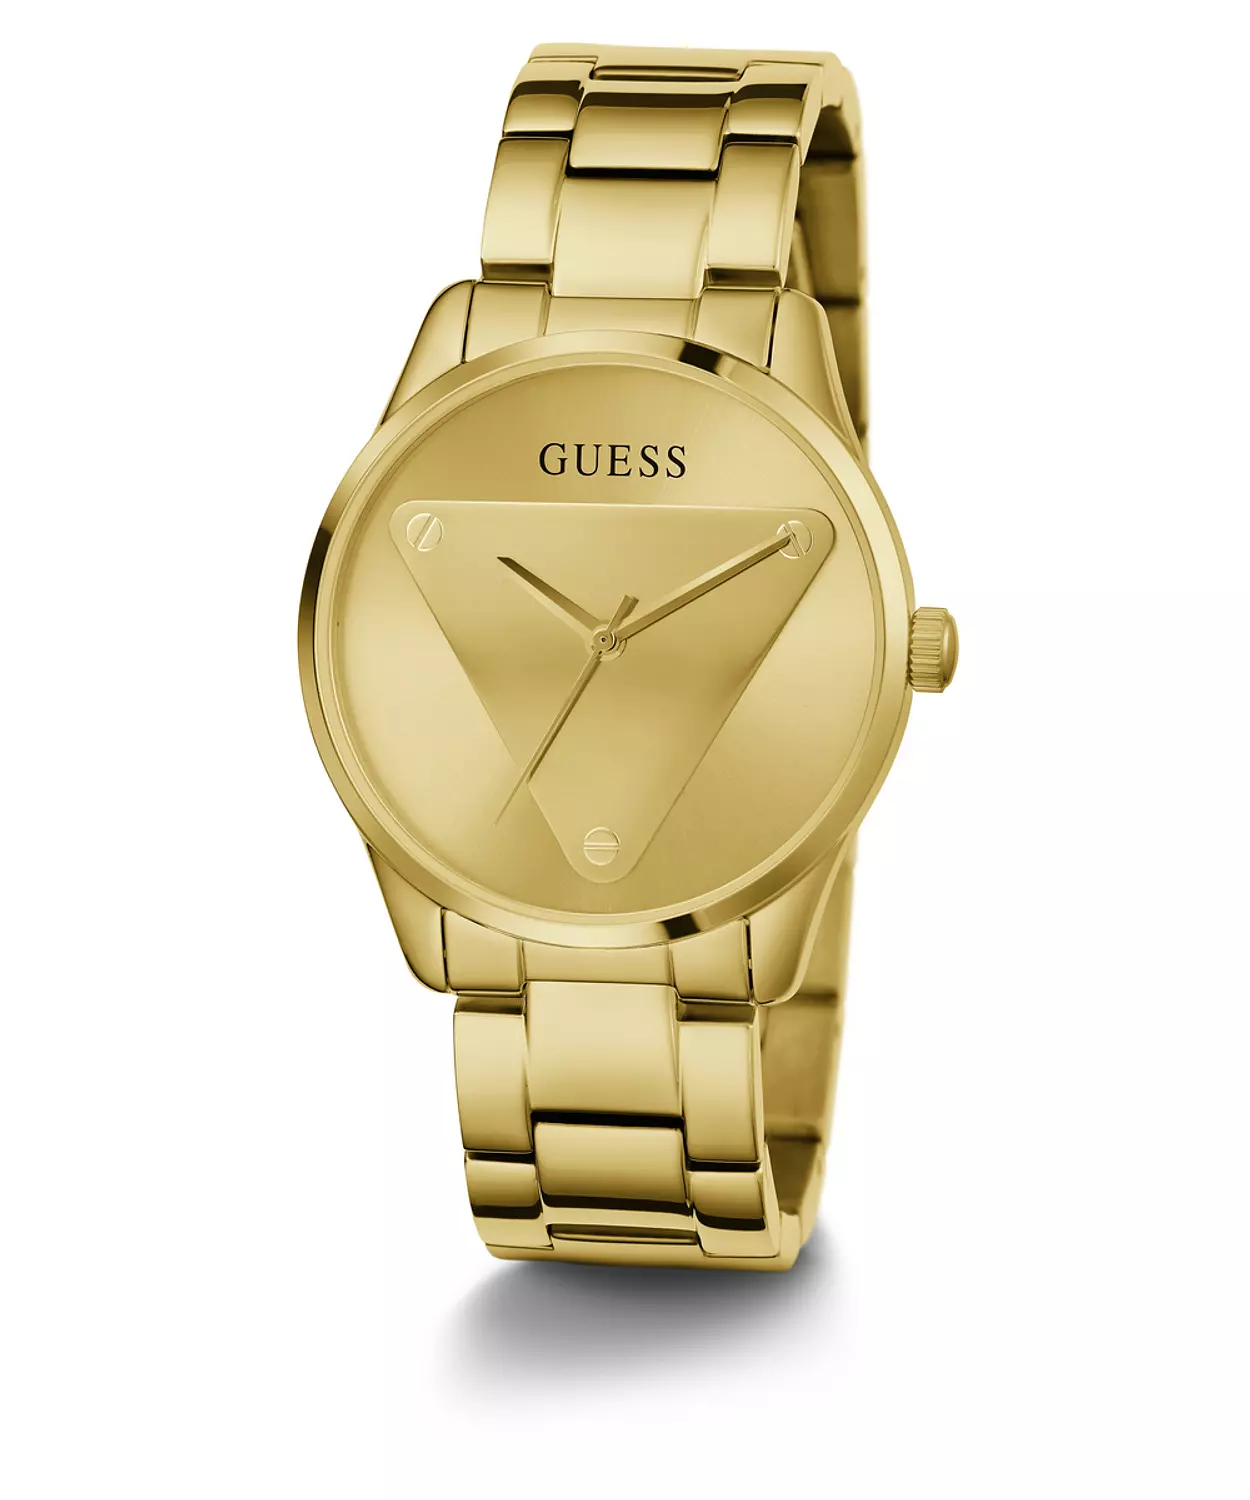 GUESS GW0485L1 ANALOG WATCH  For Women Gold Stainless Steel Polished Bracelet  1